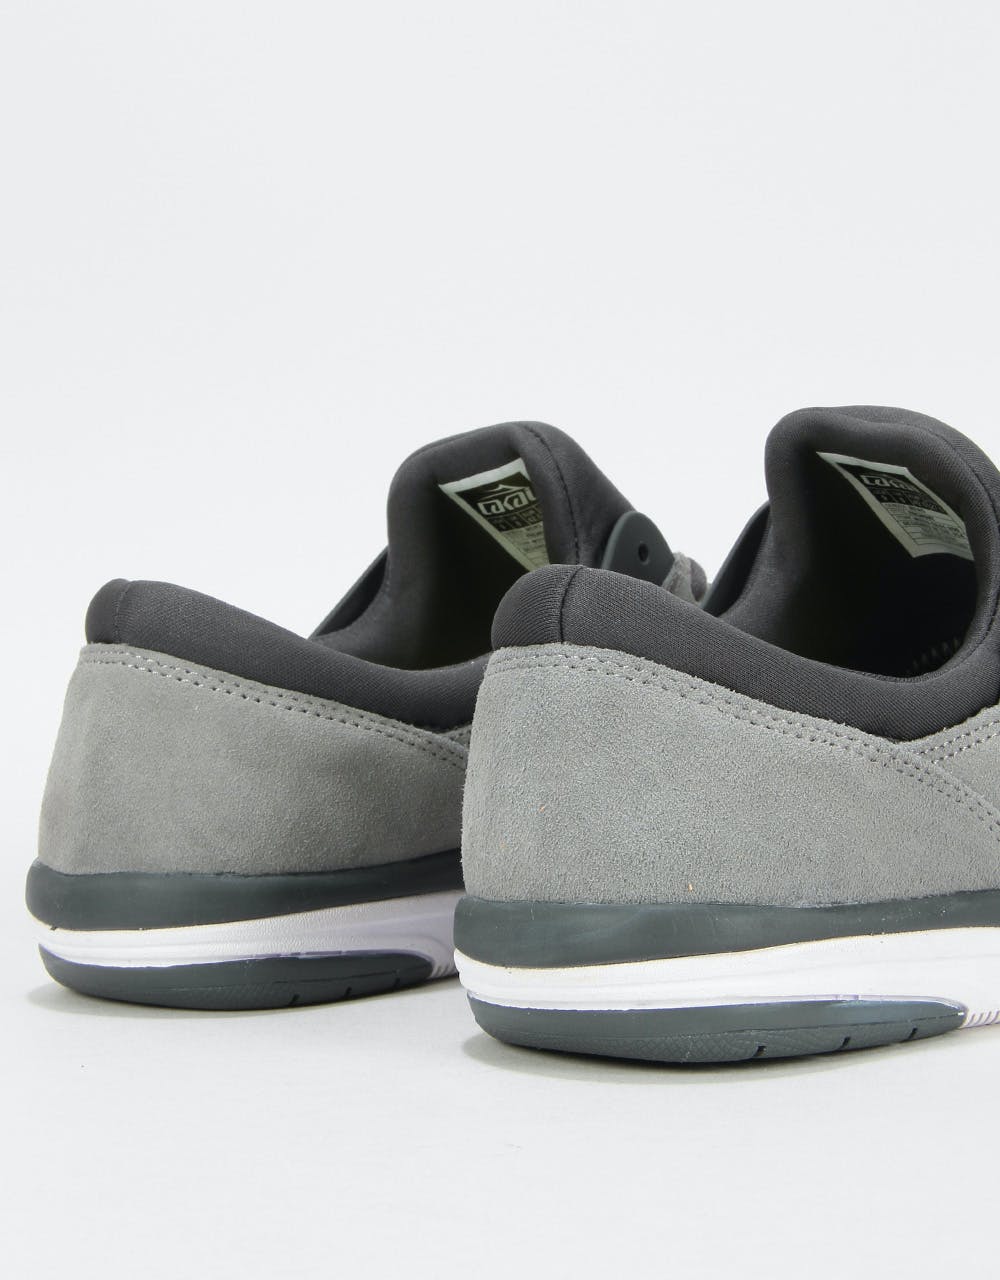 Lakai Fremont Skate Shoes - Grey Charcoal Suede